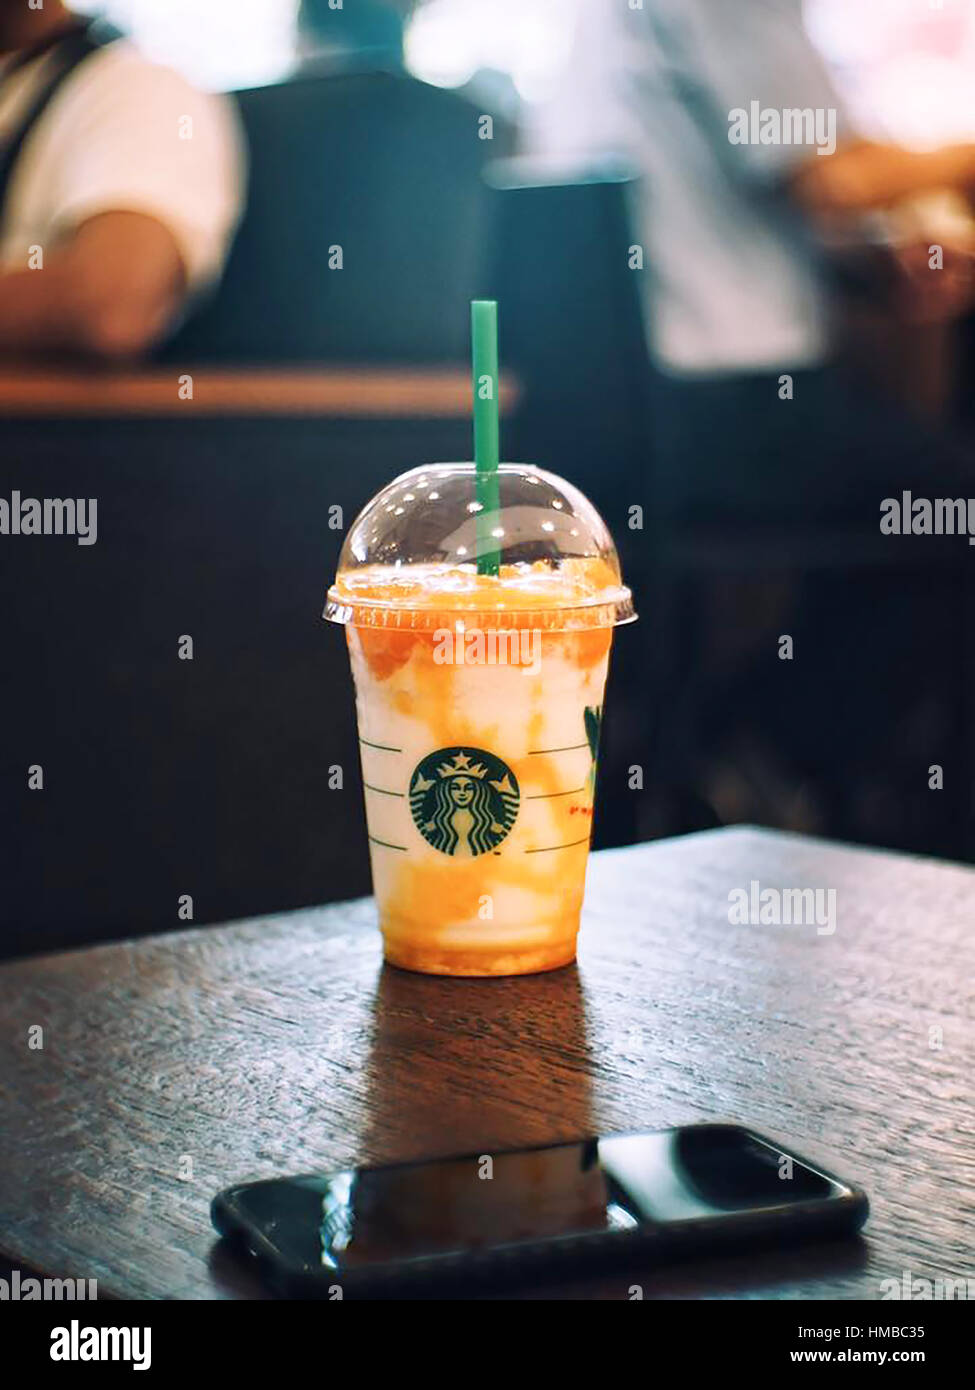 Bangkok, Thailand - Dec 25, 2016 : A cup of Starbuck Coffee Beverages.  iced latte Teavana and mobilephone background. Stock Photo